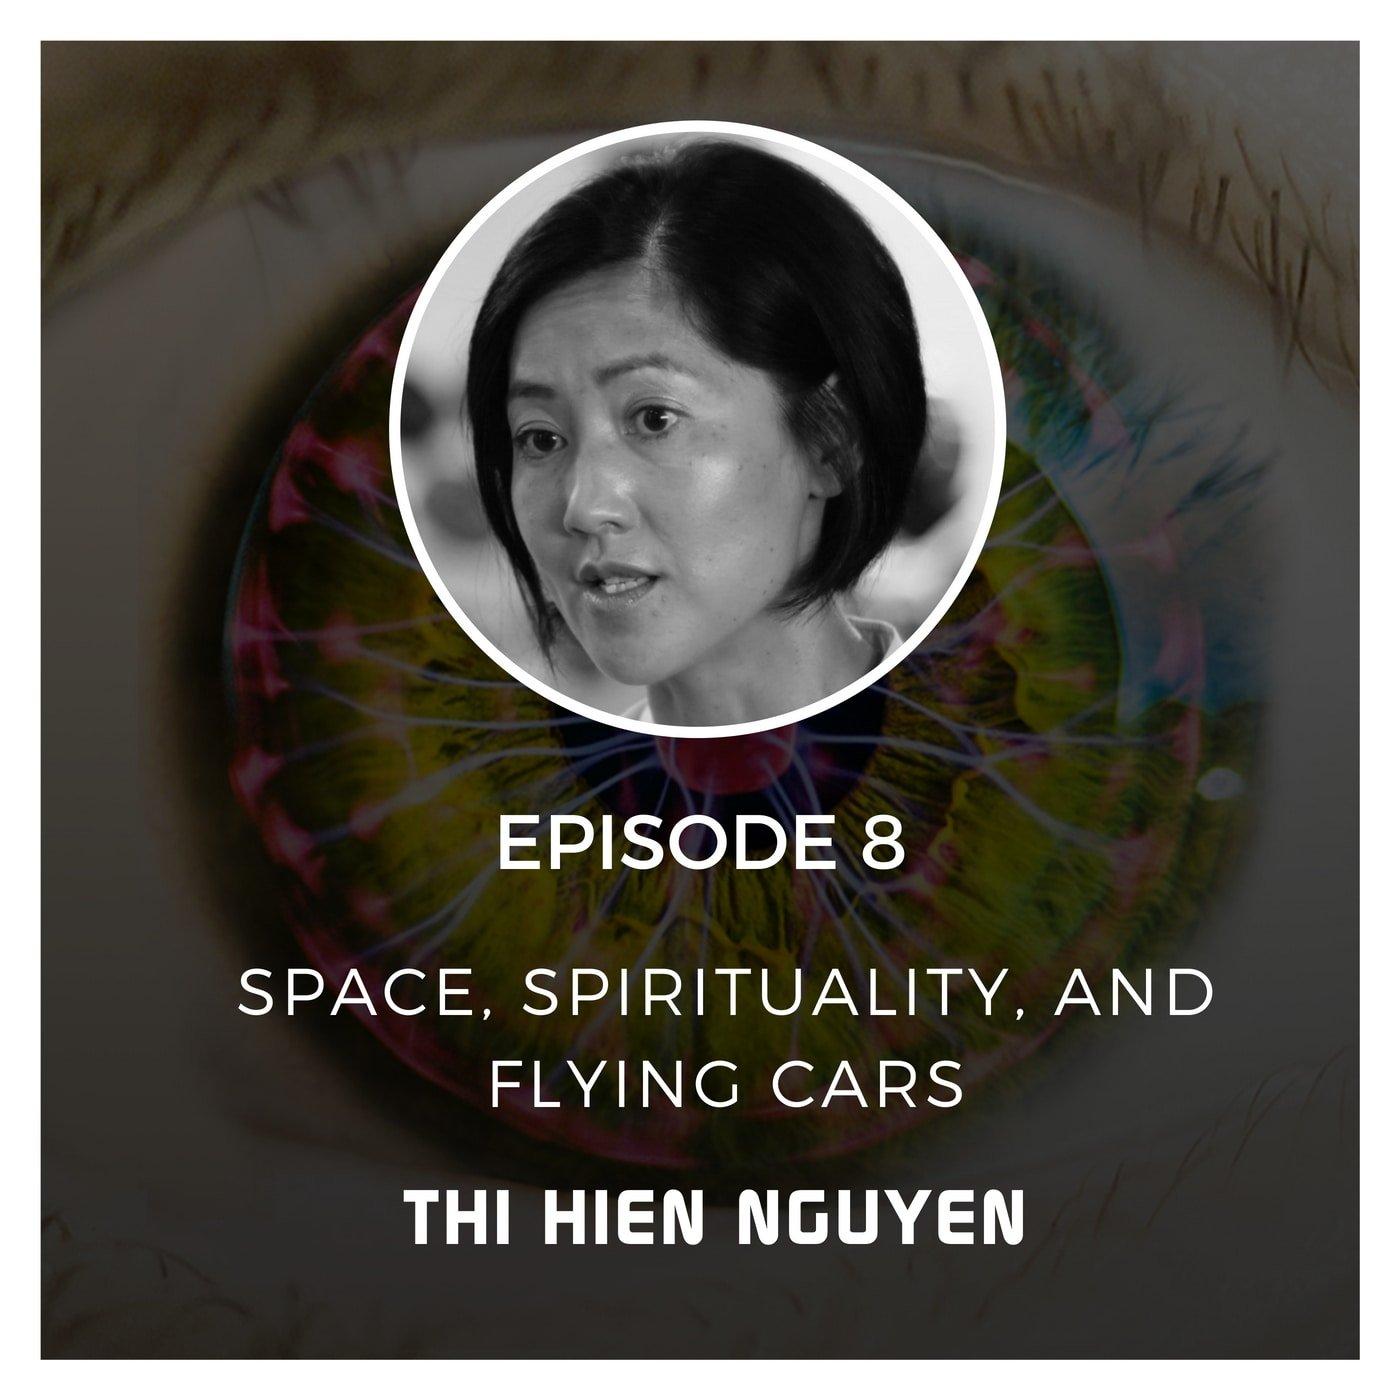 Space, Spirituality, and Flying Cars with Thi Hien Nguyen - Episode 8